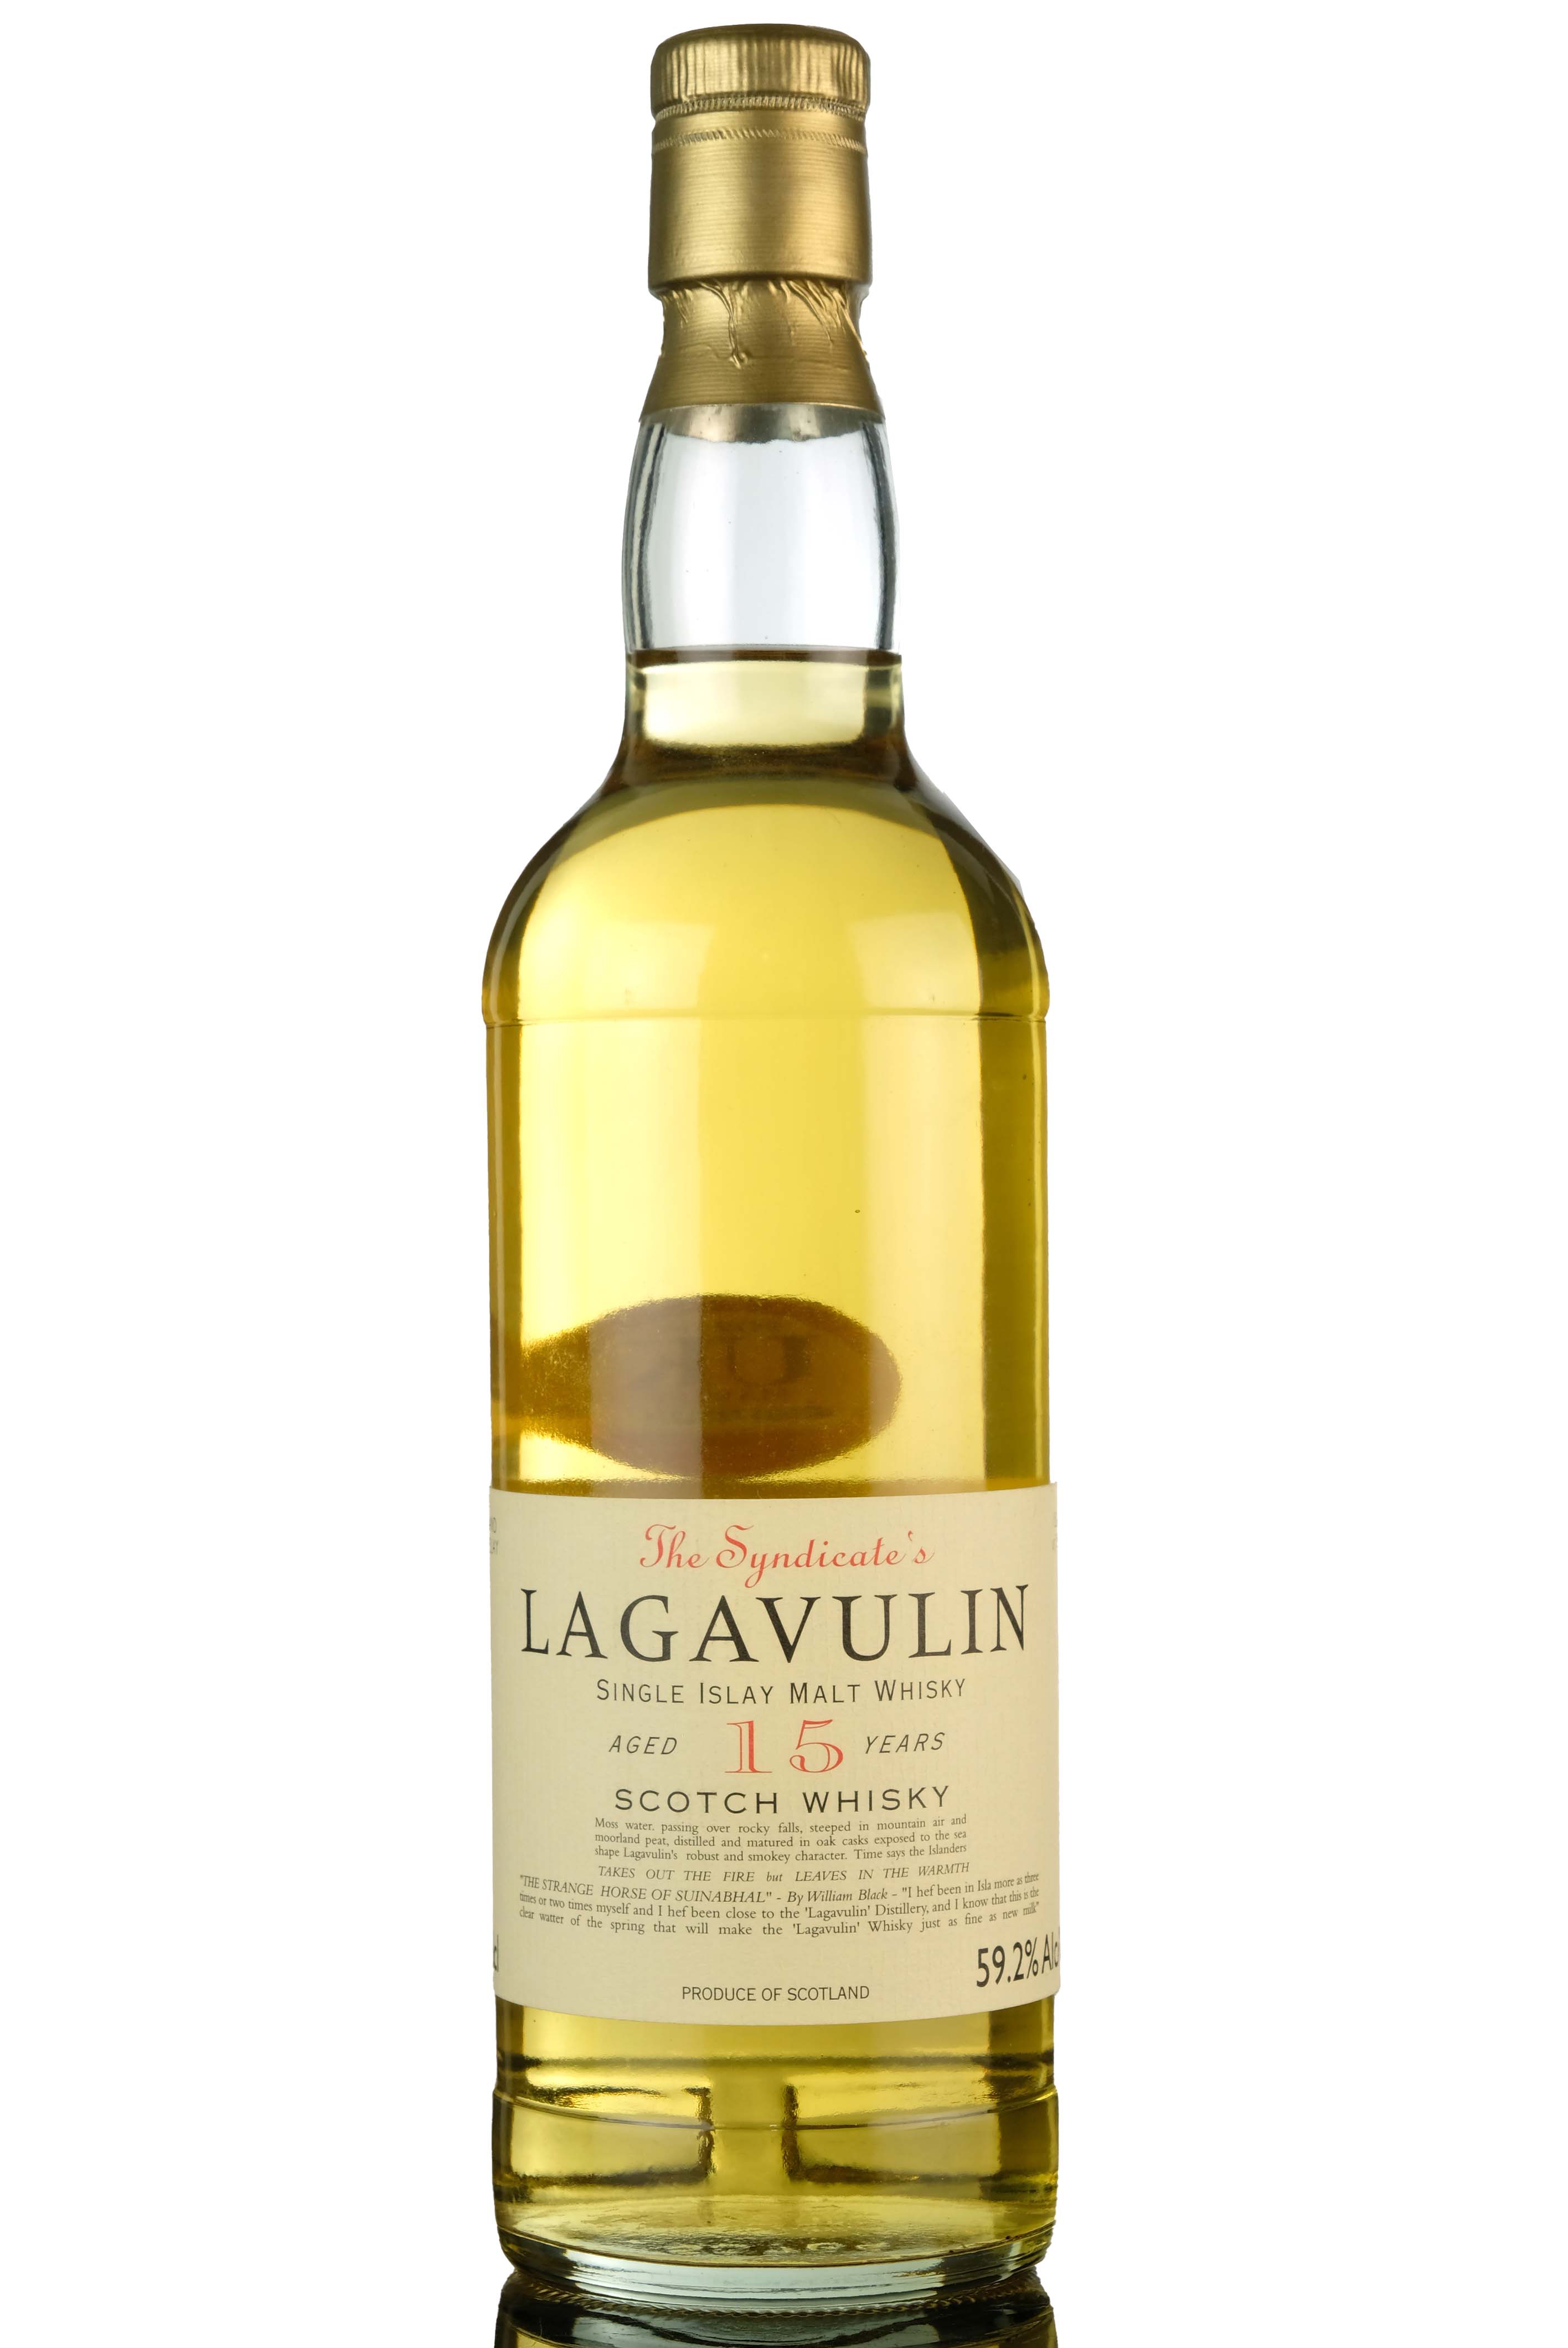 Lagavulin 1979 - 15 Year Old - The Syndicates - Mid 1990s